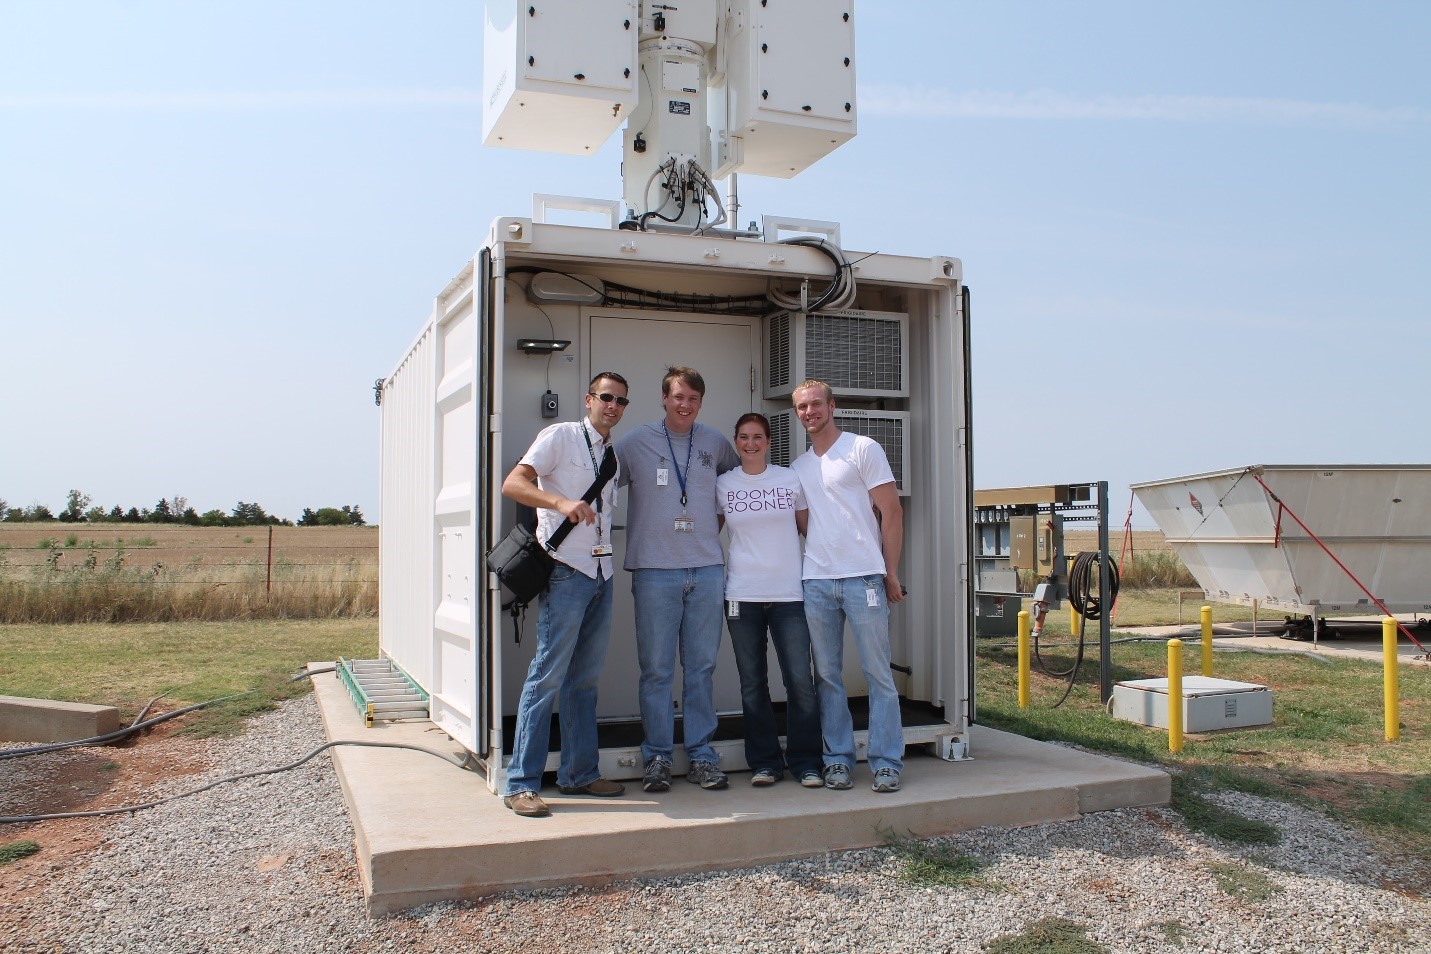 Left to right, Theisen and University of Oklahoma student data-quality analysts Aaron Hardin, Erika Kruse, and John Ragland pose at ARM’s Southern Great Plains atmospheric observatory in 2012.